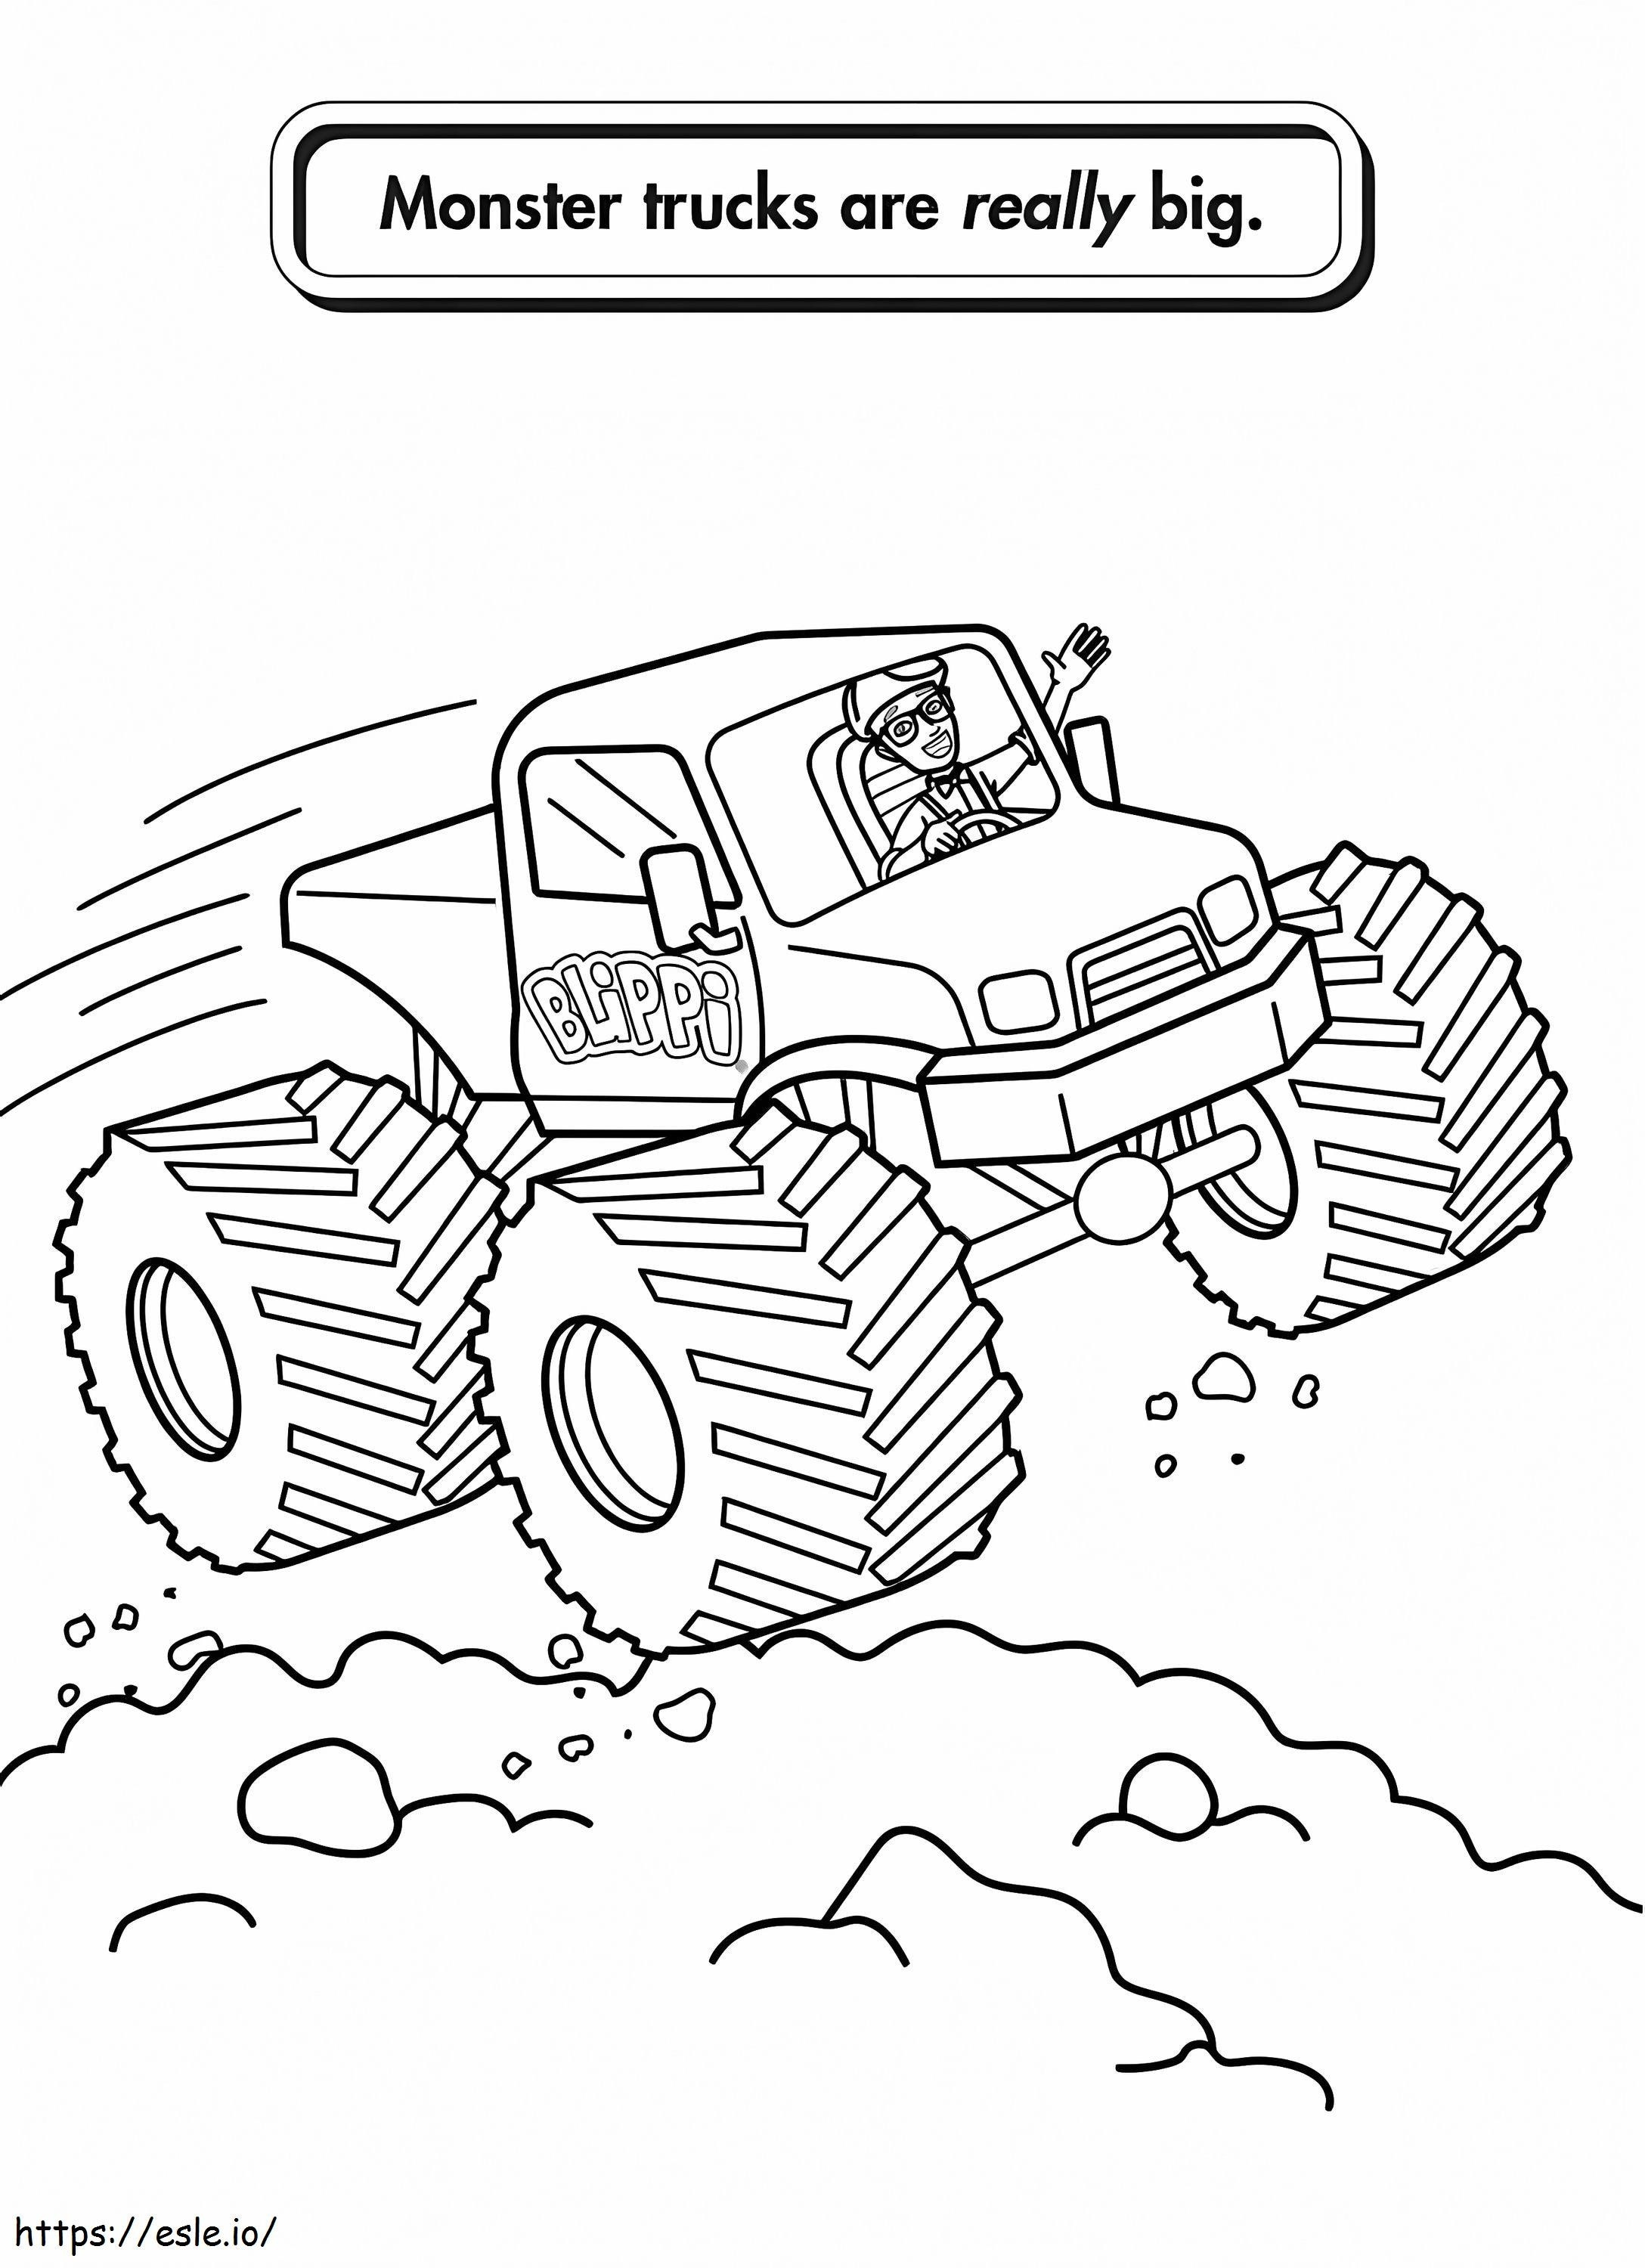 Blippi Driving Monster Truck coloring page